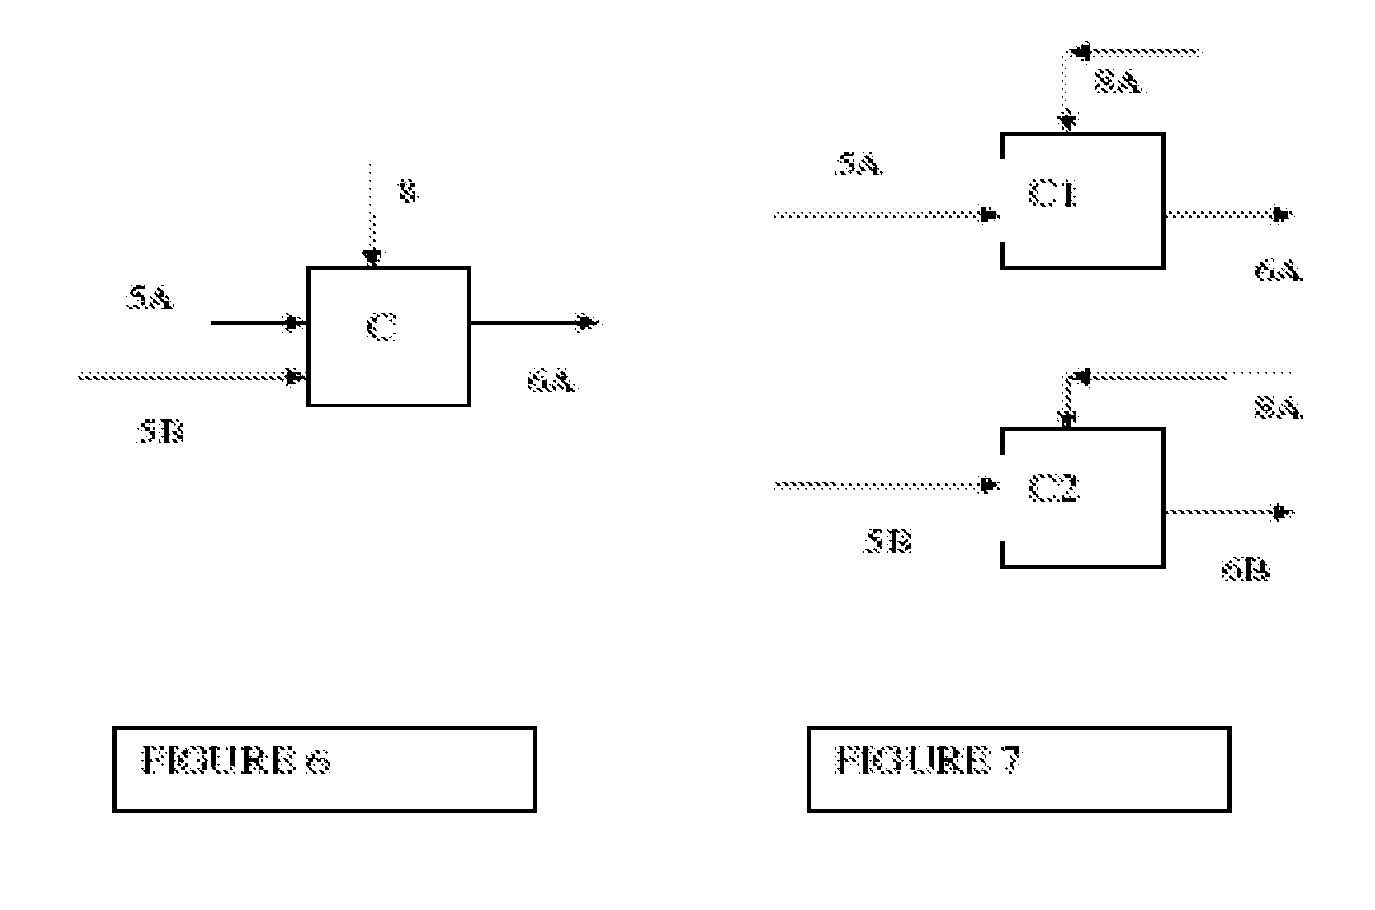 Integrated process for the manufacture of fluorinated olefins